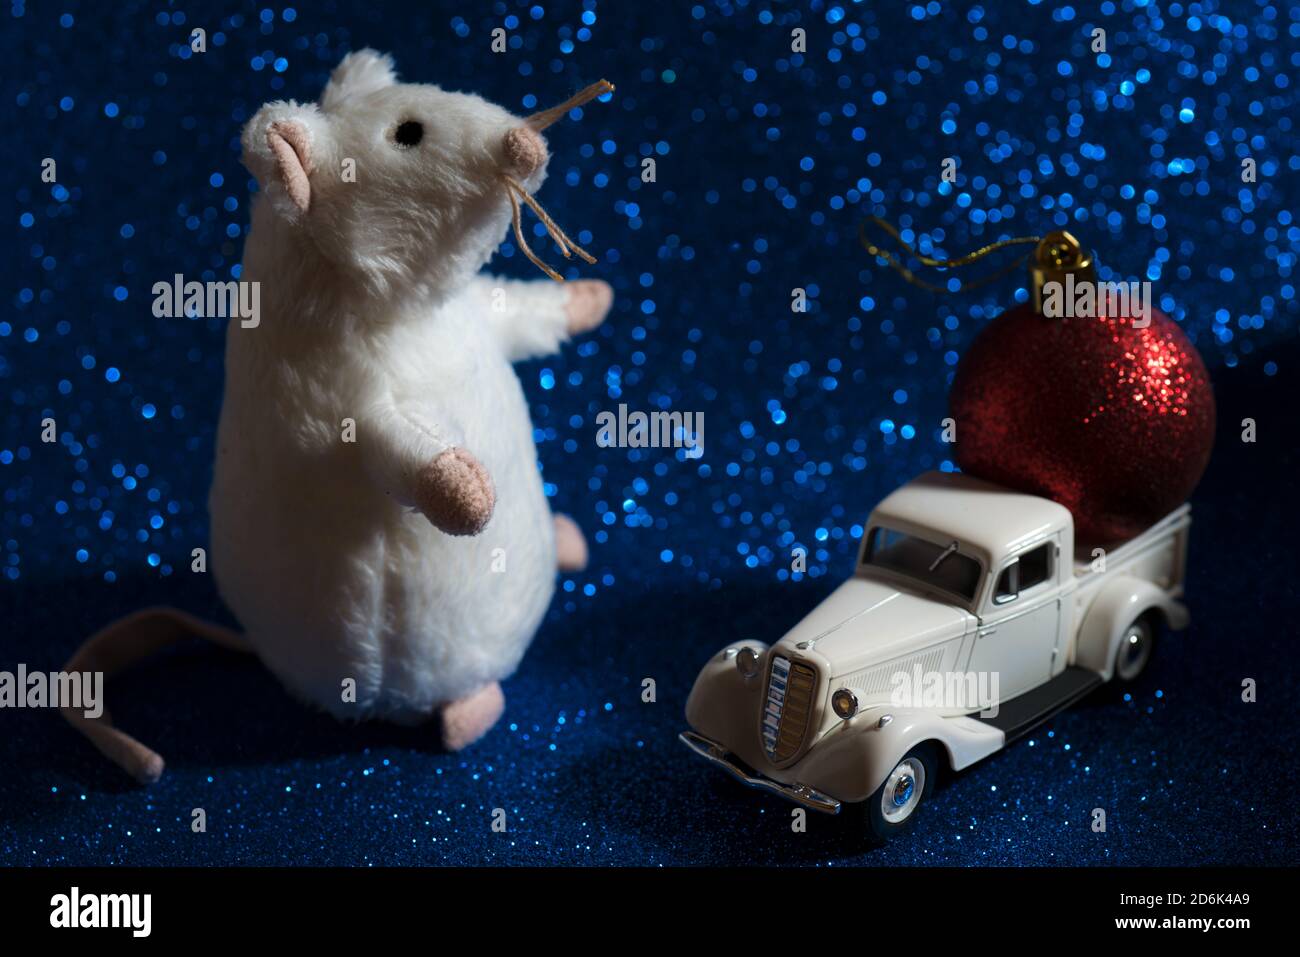 A rat with a retro toy car and red ball on shiny Christmas background Stock Photo